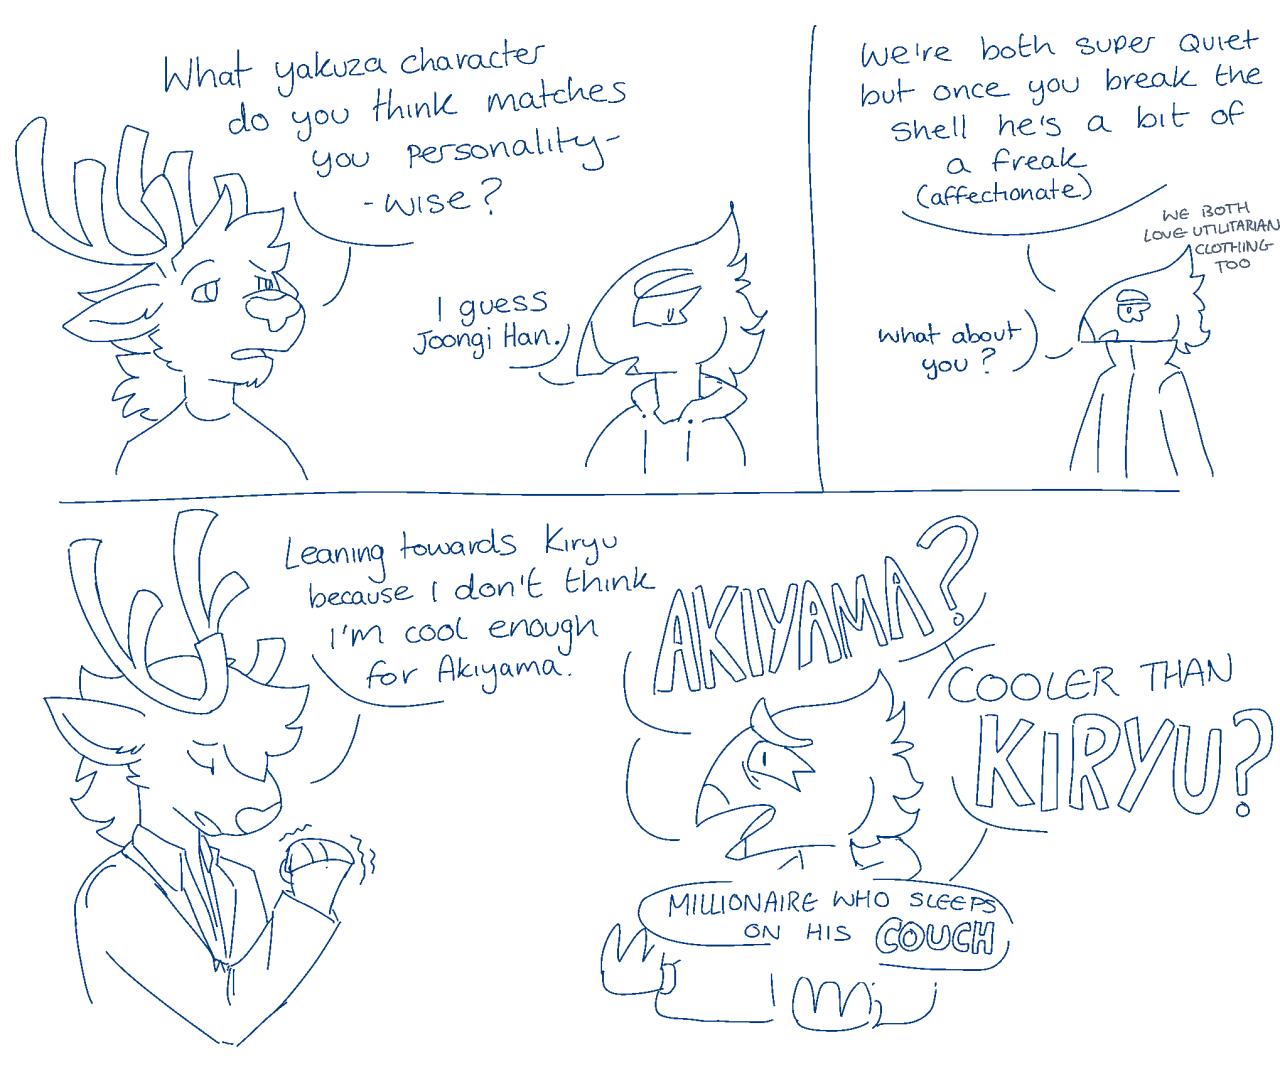 A comic featuring a reindeer (Fiz) and a penguin (Goose) having a conversation.  Panel 1: Fiz: 'What yakuza character do you think matches you personality wise?' Goose: 'I guess Joongi Han.' Panel 2: Goose is wearing Joongi's outfit from 7. 'We're both super quiet but once you break the shell he's a bit of a freak (affectionate). What about you?' Faded text in the background reads 'We both love utilitarian clothing too'. Panel 3: Fiz is now wearing Kiryu's grey suit, clenching a fist: 'Leaning towards kiryu because i dont think i'm cool enough for Akiyama.' Goose looks exasperated, text blown up in a bubble styled font: 'AKIYAMA? Cooler than KIRYU? Millionaire who sleeps on his COUCH.'